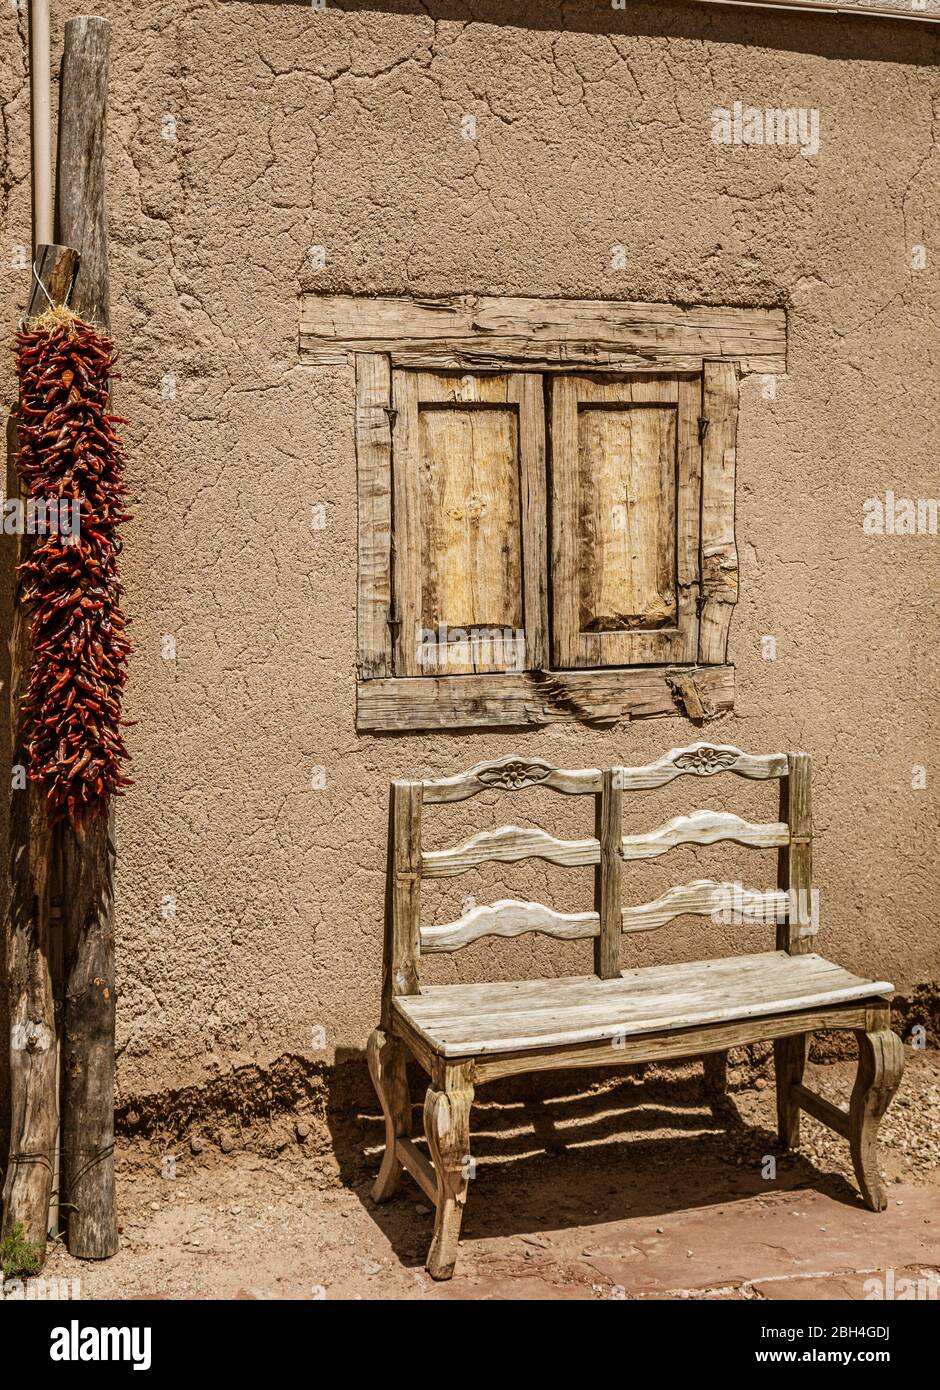 Taos New Mexico, Kit Carson home and museum exterior. Stock Photo